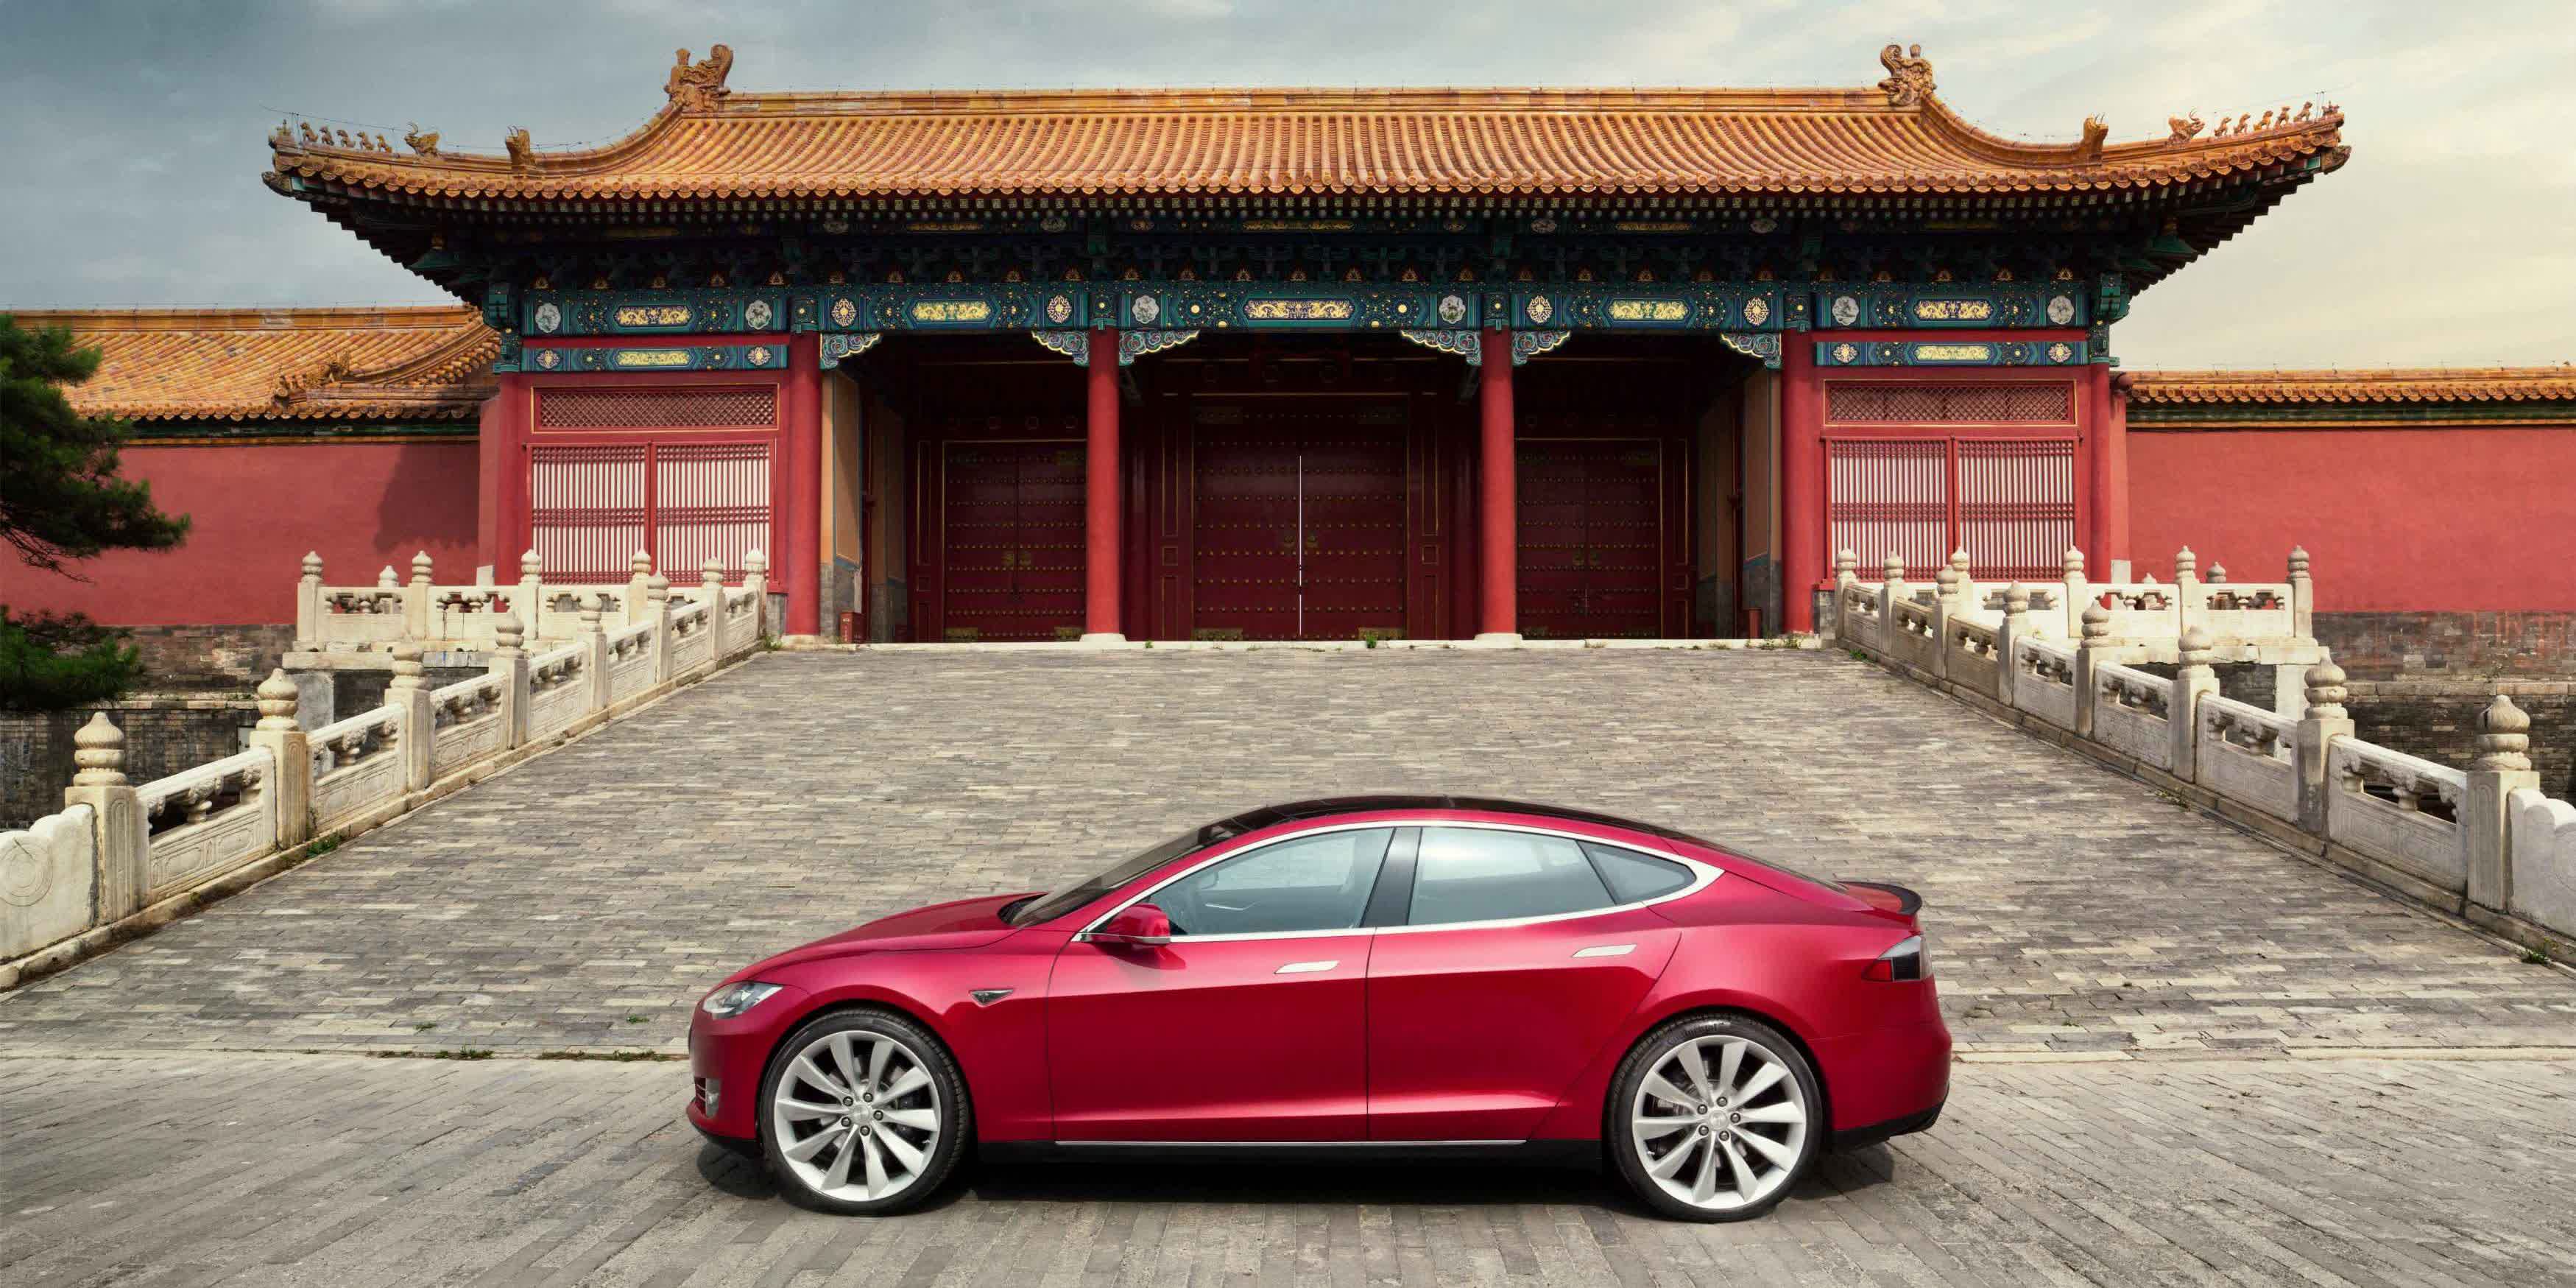 China suspects Tesla vehicles of spying, restricts use by military and state employees